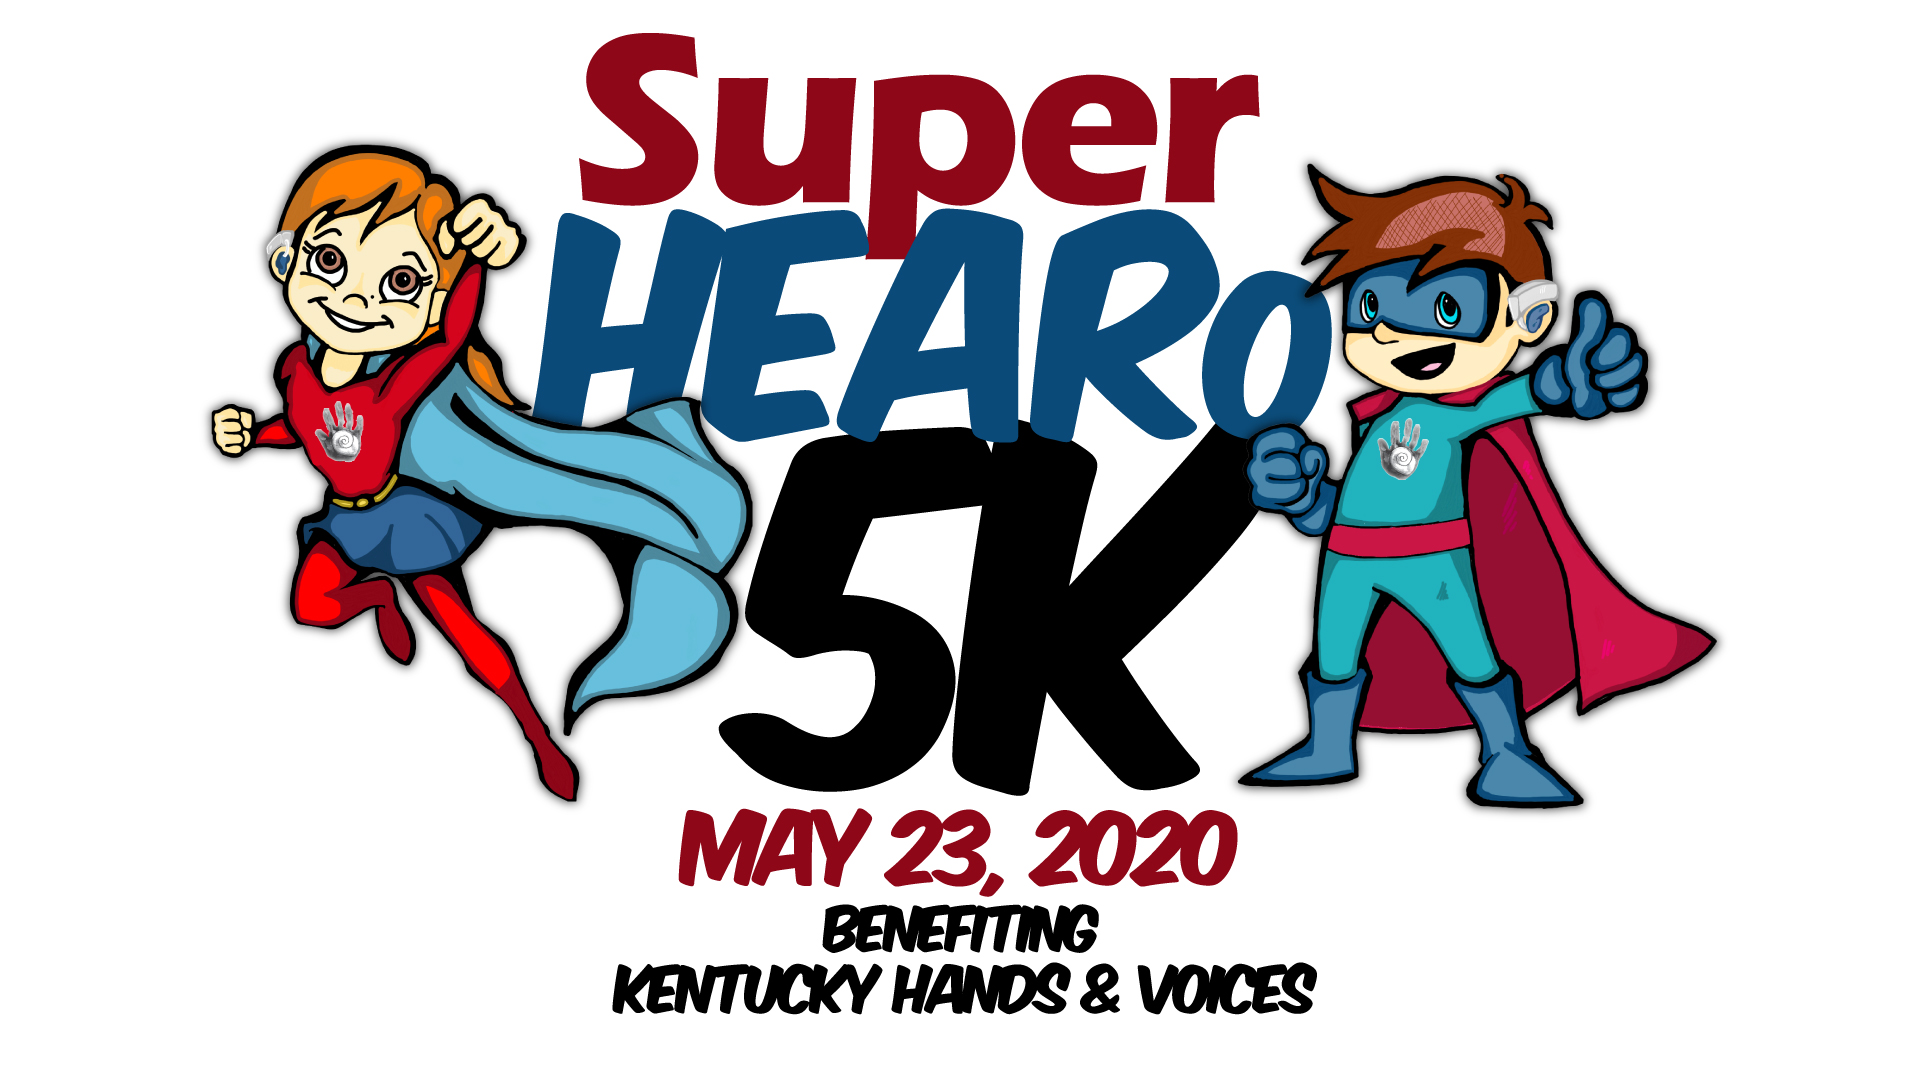 SuperHEARo 5K Kentucky Hands and Voices